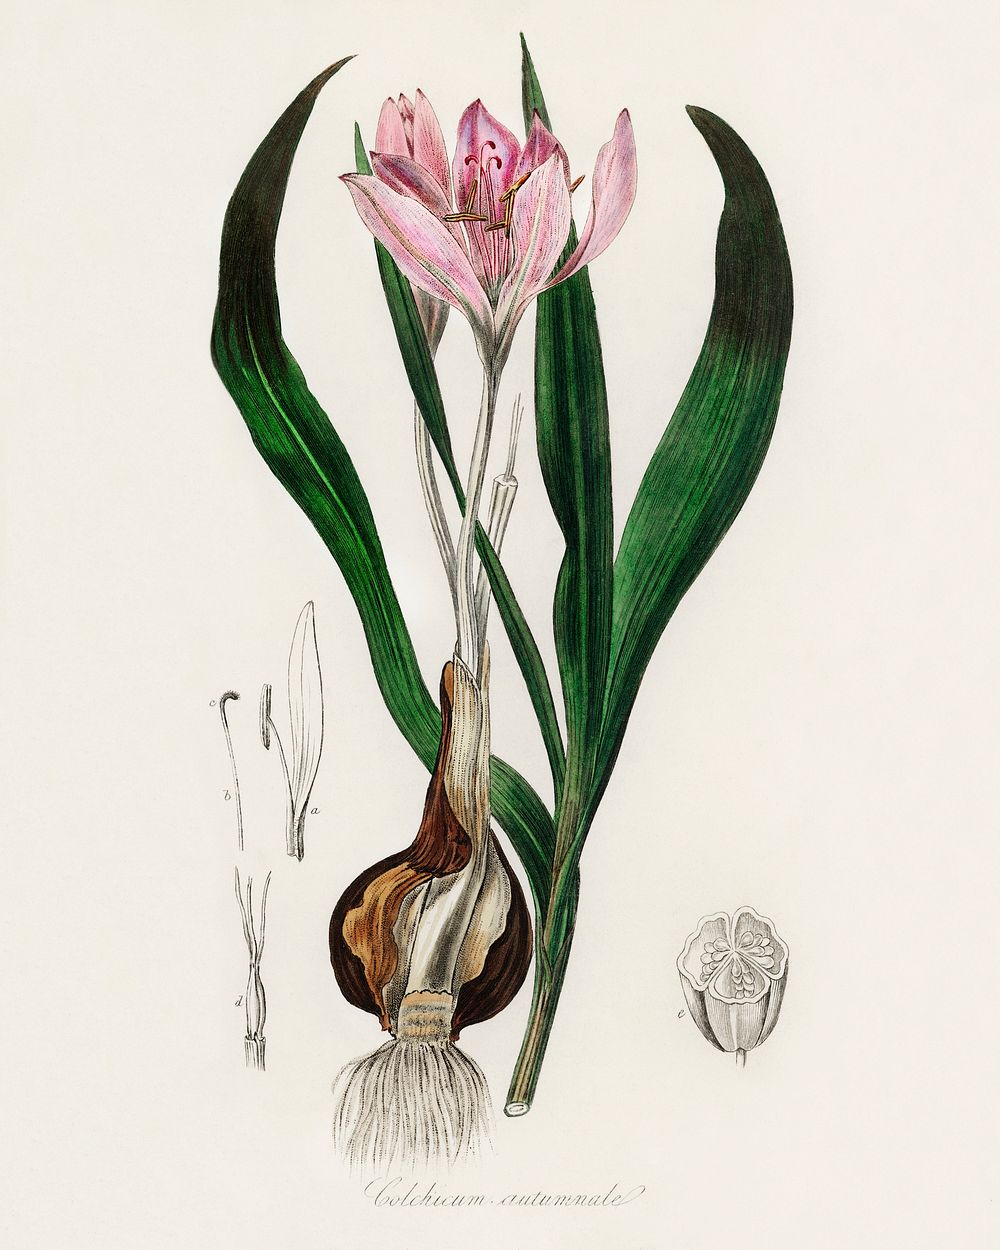 Autumn crocus (Colchicum autumnale) illustration. Digitally enhanced from our own book, Medical Botany (1836) by John…